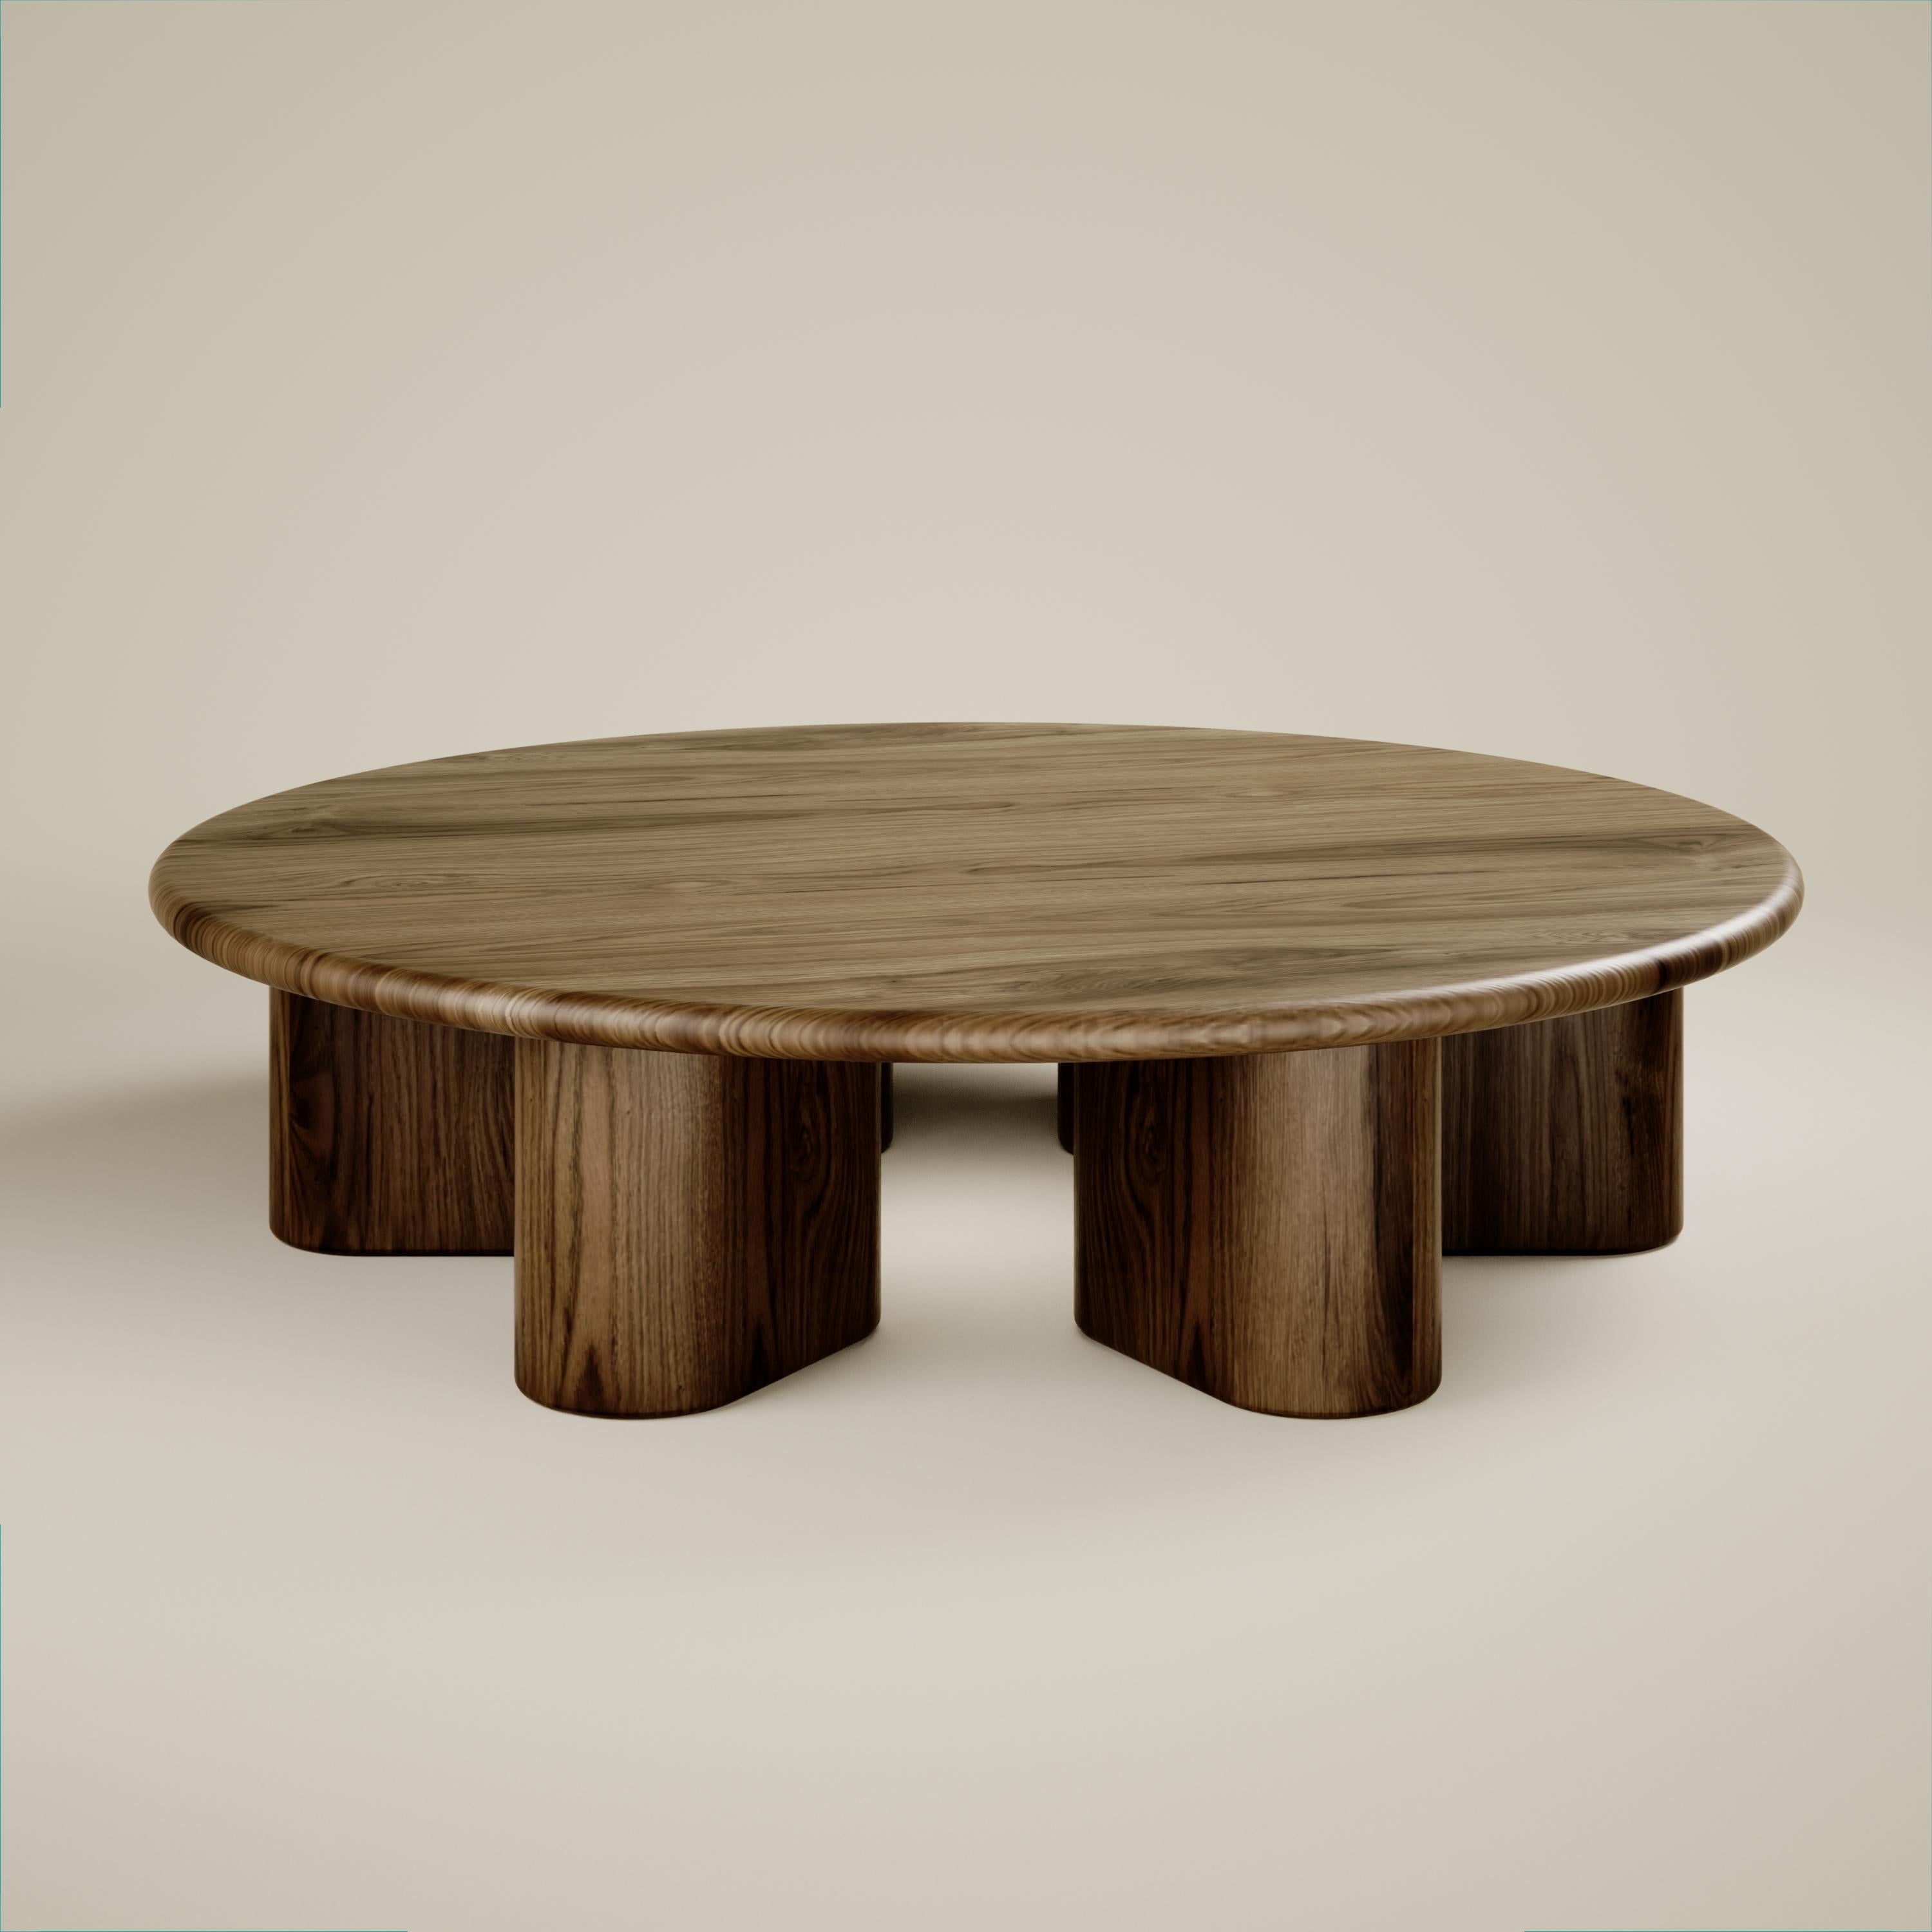 High end round solid walnut wood table designed by Vincent Mazenauer. The table can be produced in other solid wood on demand as oak, eucalyptus,...
That table came from the Element coffee table collection by Vincent Mazenauer. The aim was to create